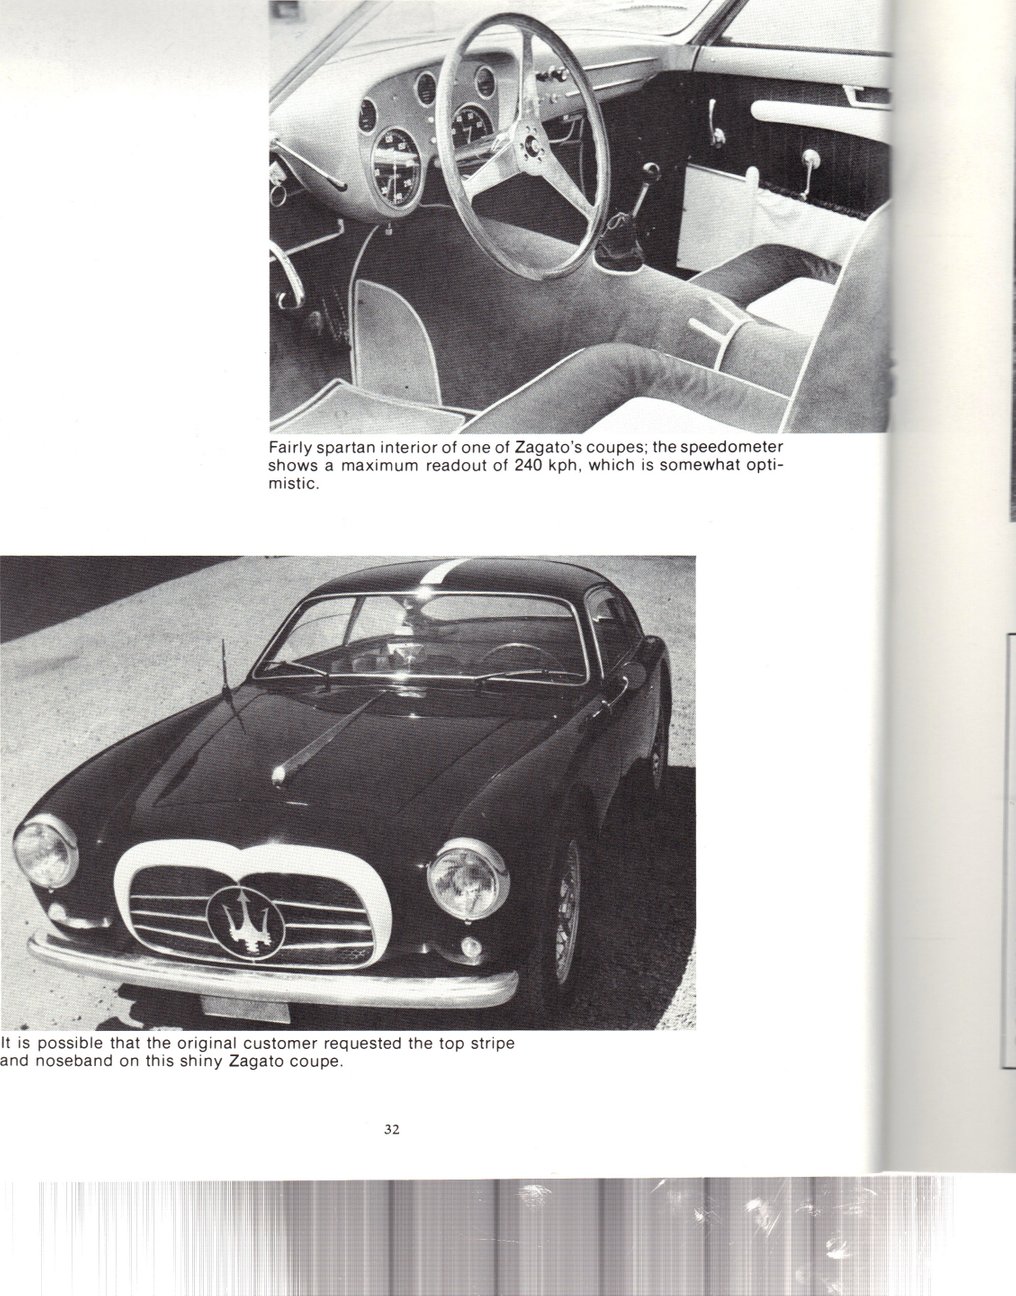 Copyright Illustrated Maserati Buyers Guide 1984. All rights reserved